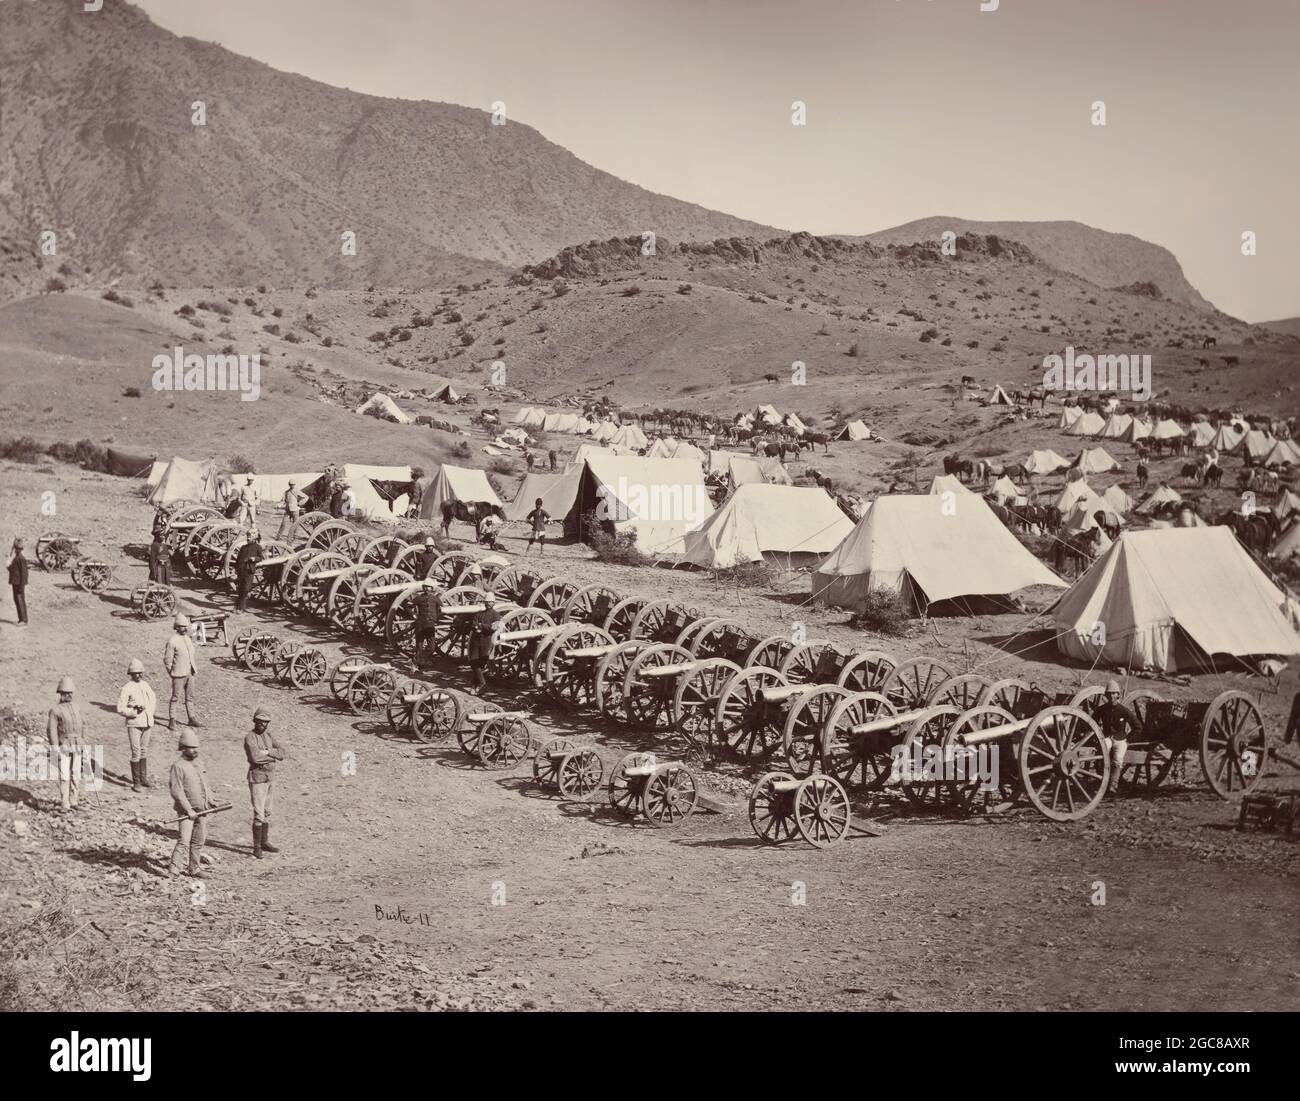 Captured Guns after the Battle of Ali Masjid, Second Anglo-Afghan War, photgraph by John Burke, 1878, digitally optimized Stock Photo